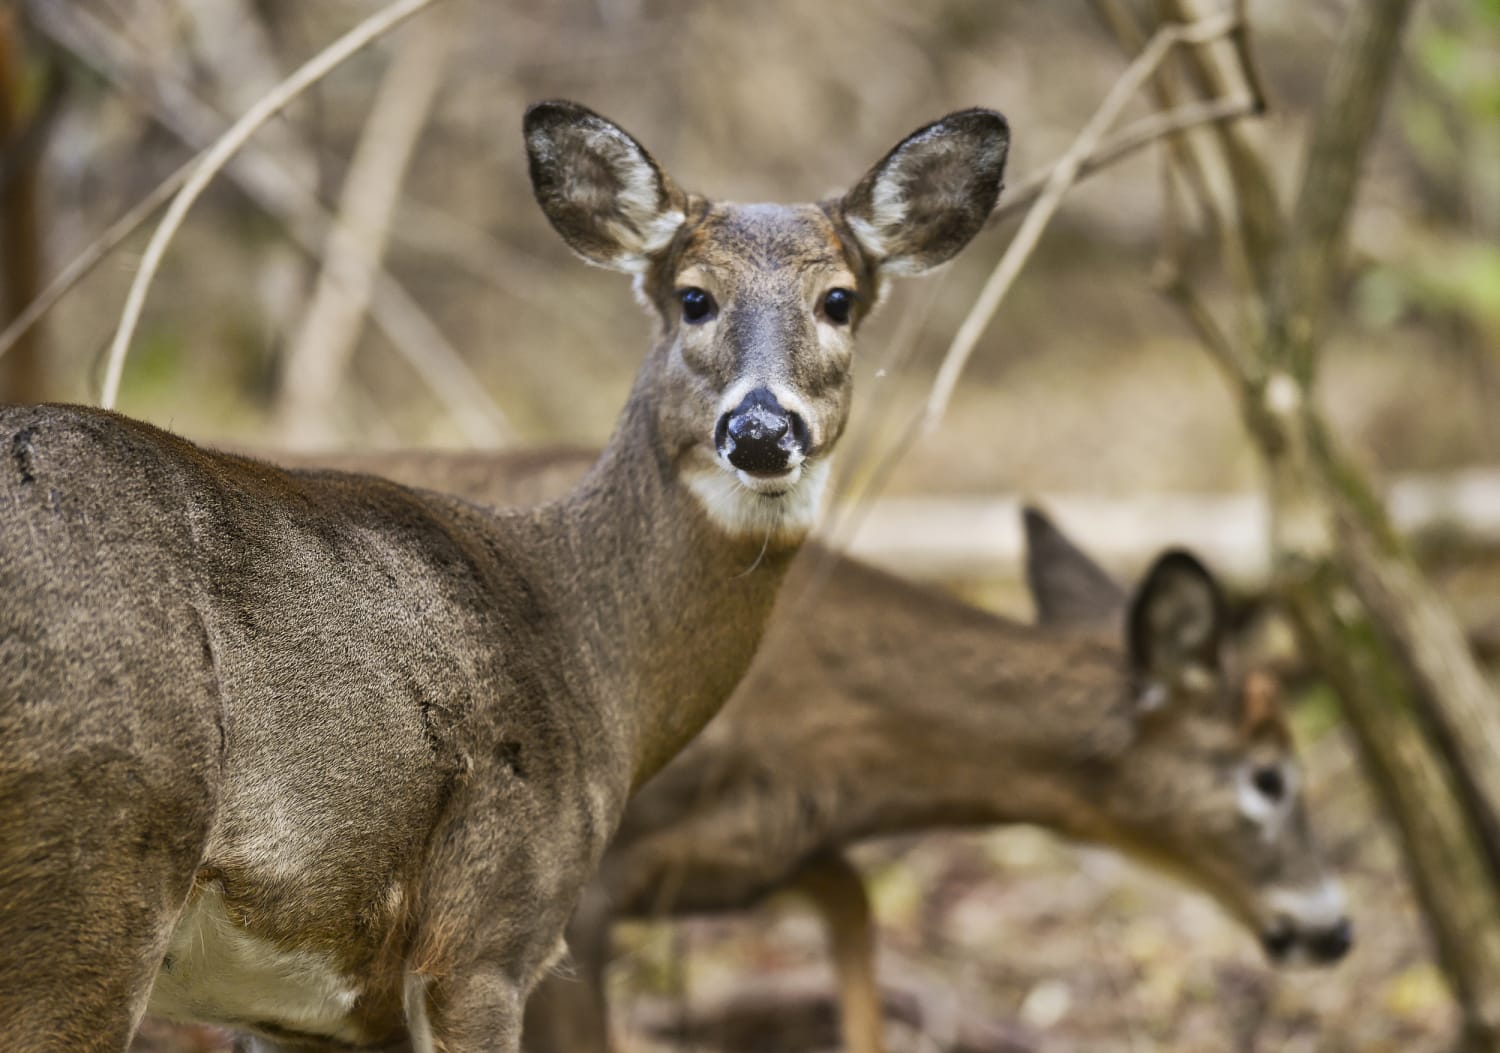 ‘Very unsettling’: Scientists see troubling signs in humans spreading Covid to deer